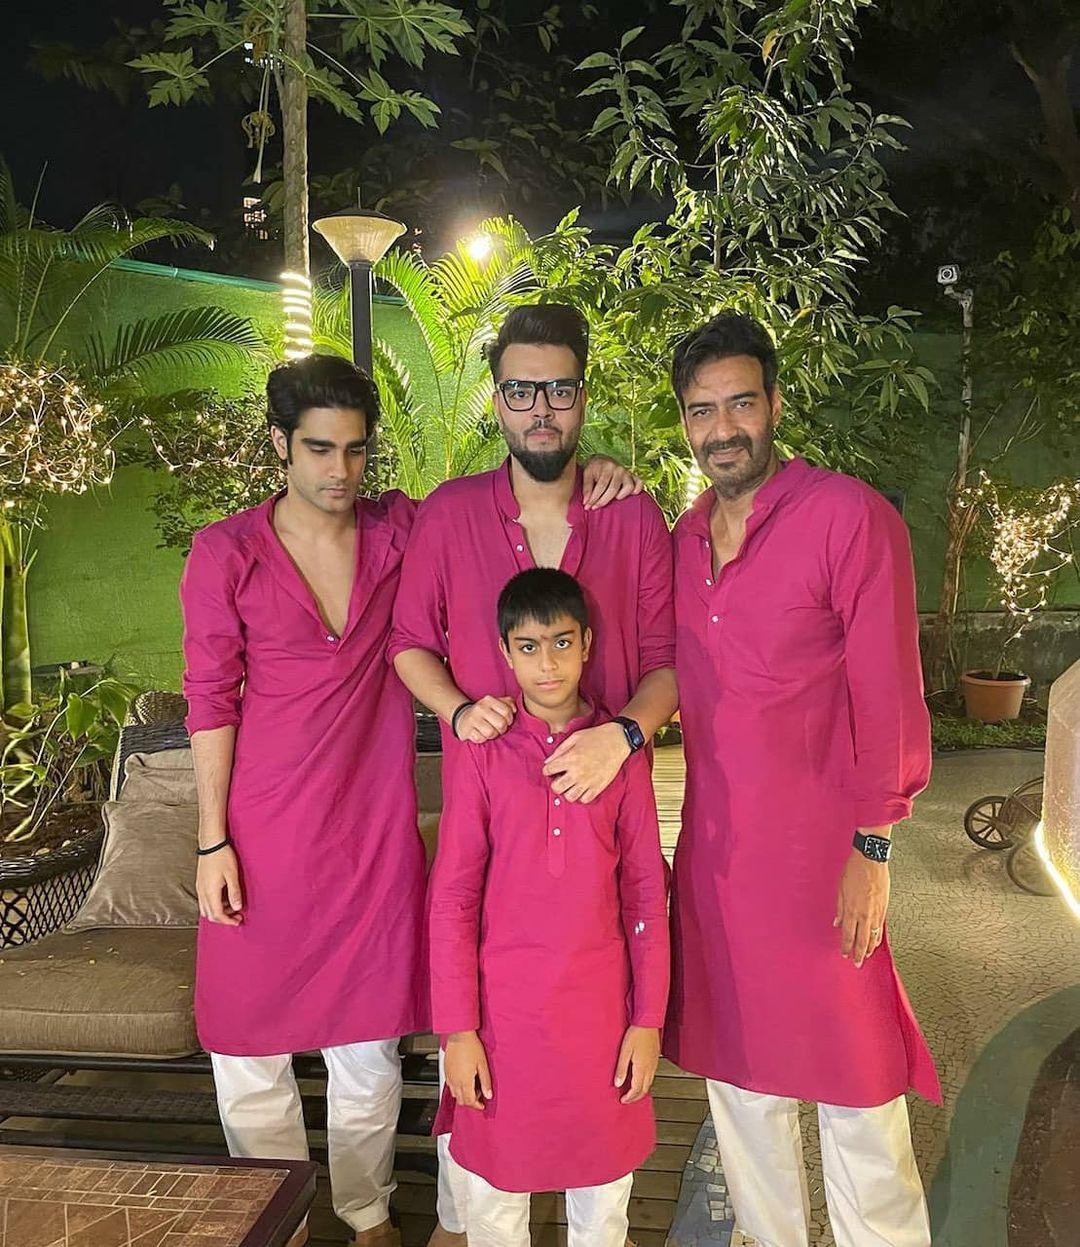 Ajay Devgan and his family also have a backyard filled with greenery. The standout feature of their Juhu home is the stylish patio furniture in this outdoor space. The comfortable vibe of the backyard makes it the family's go-to spot for relaxation.